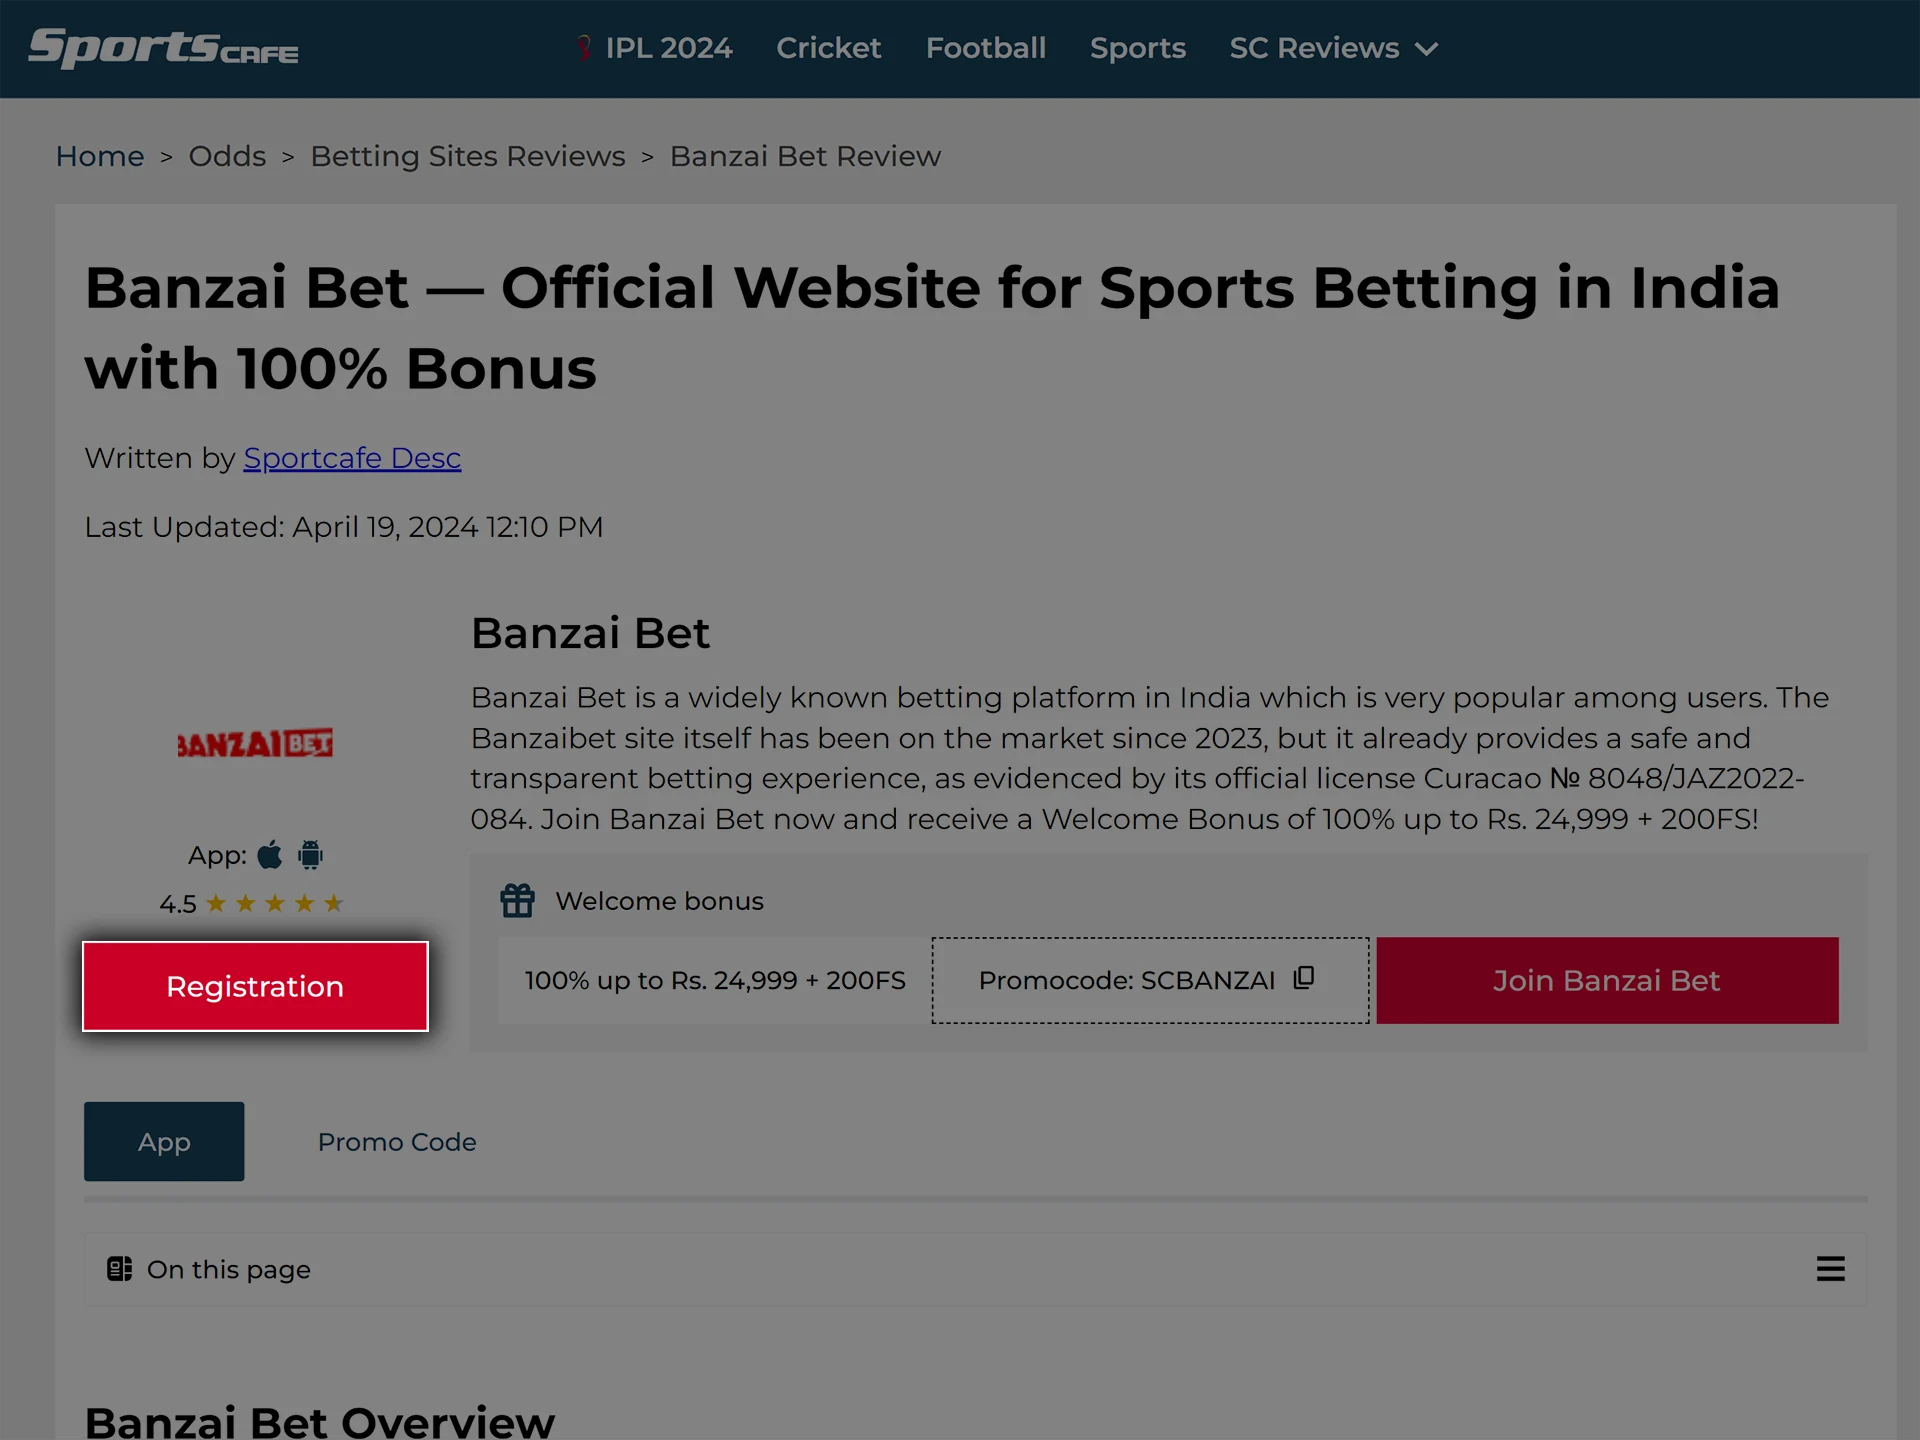 Visit the Banzai Bet website using the link.